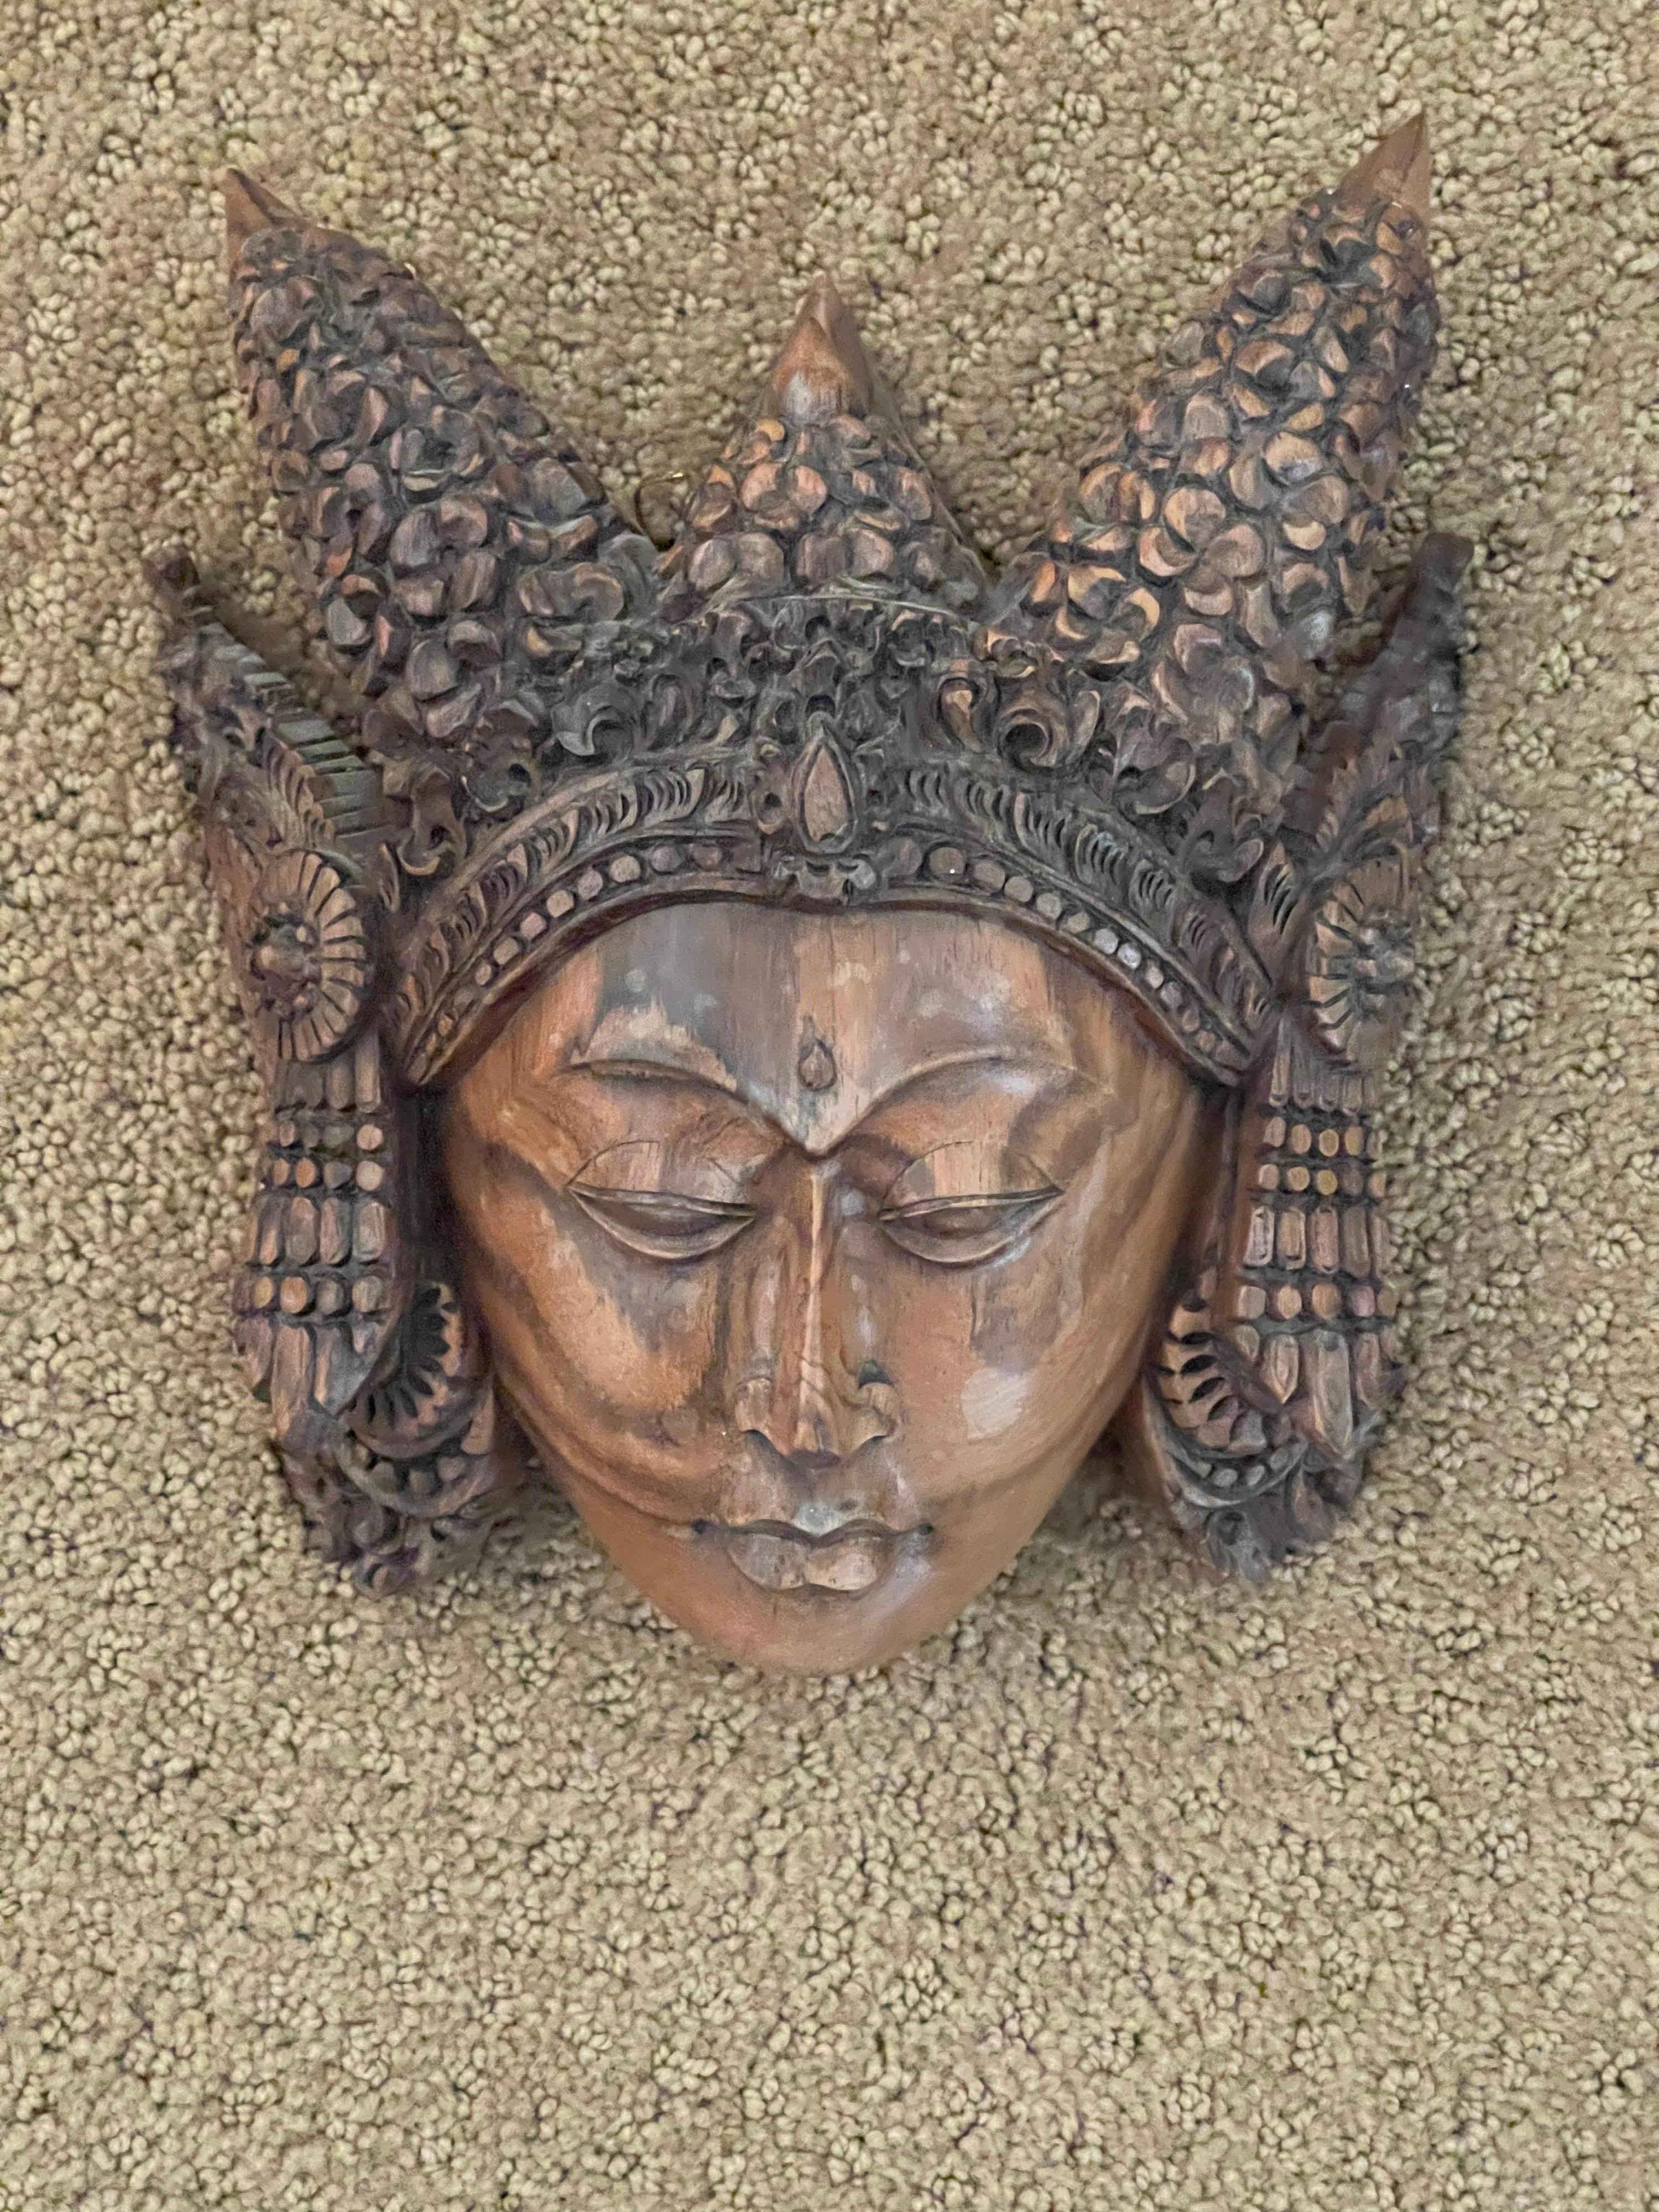 A very cool hand carved wooden buddha head wall plaque from Thailand, circa 1970s. The piece is in very good condition and measures 8